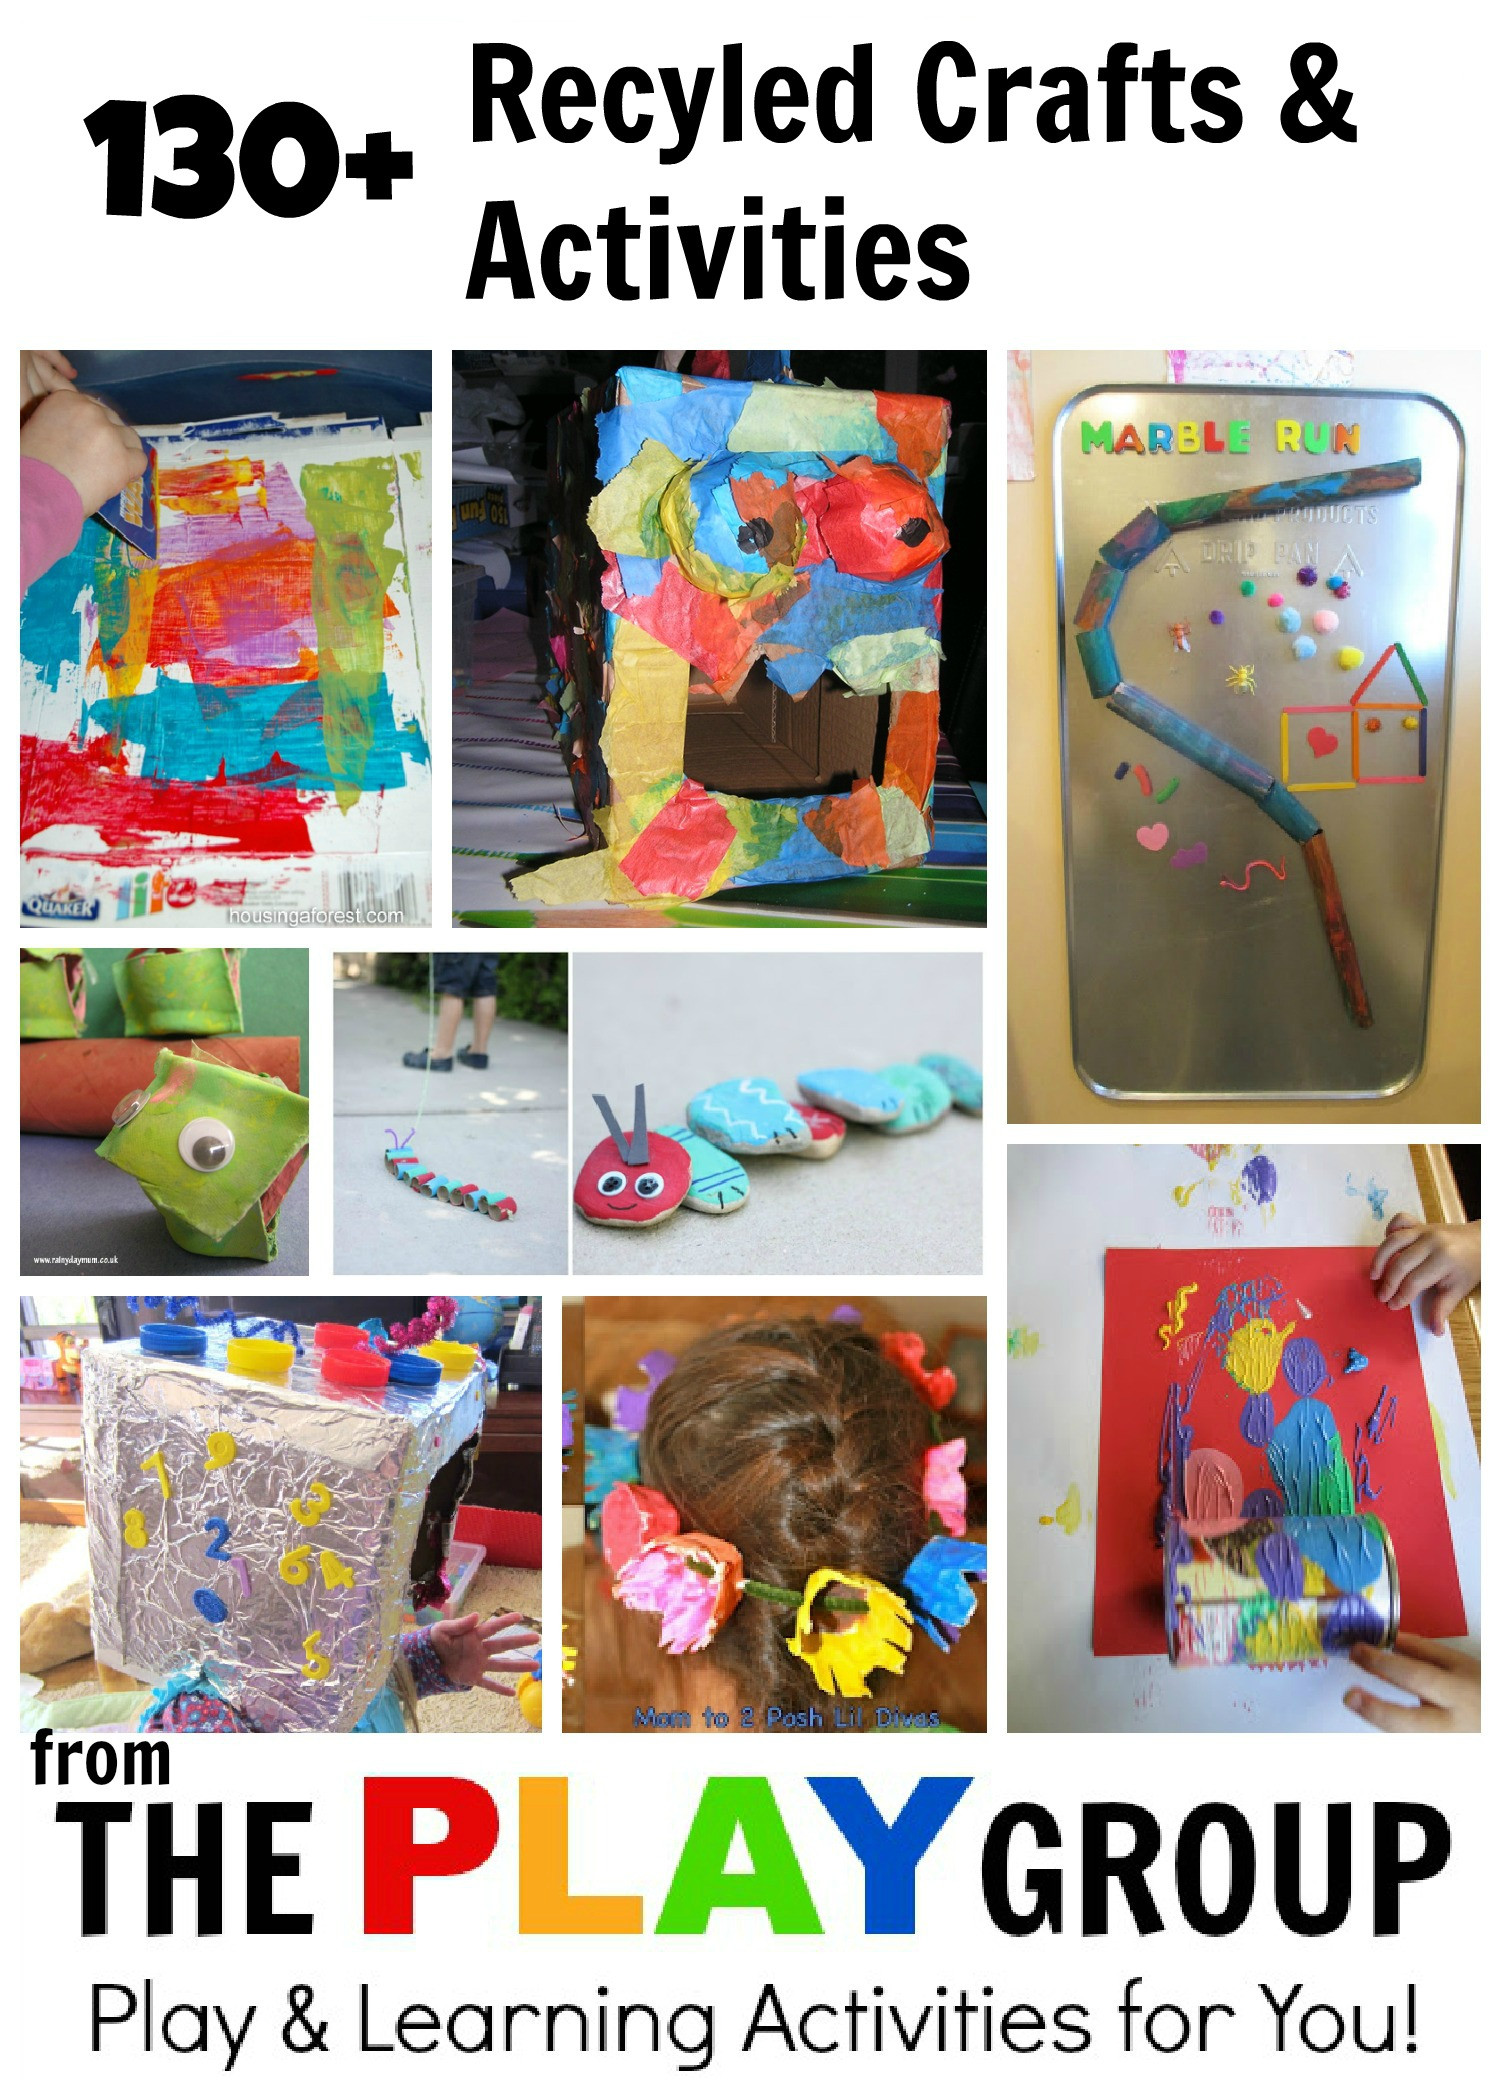 The 25 Best Ideas for Recycling Craft for Preschoolers – Home, Family